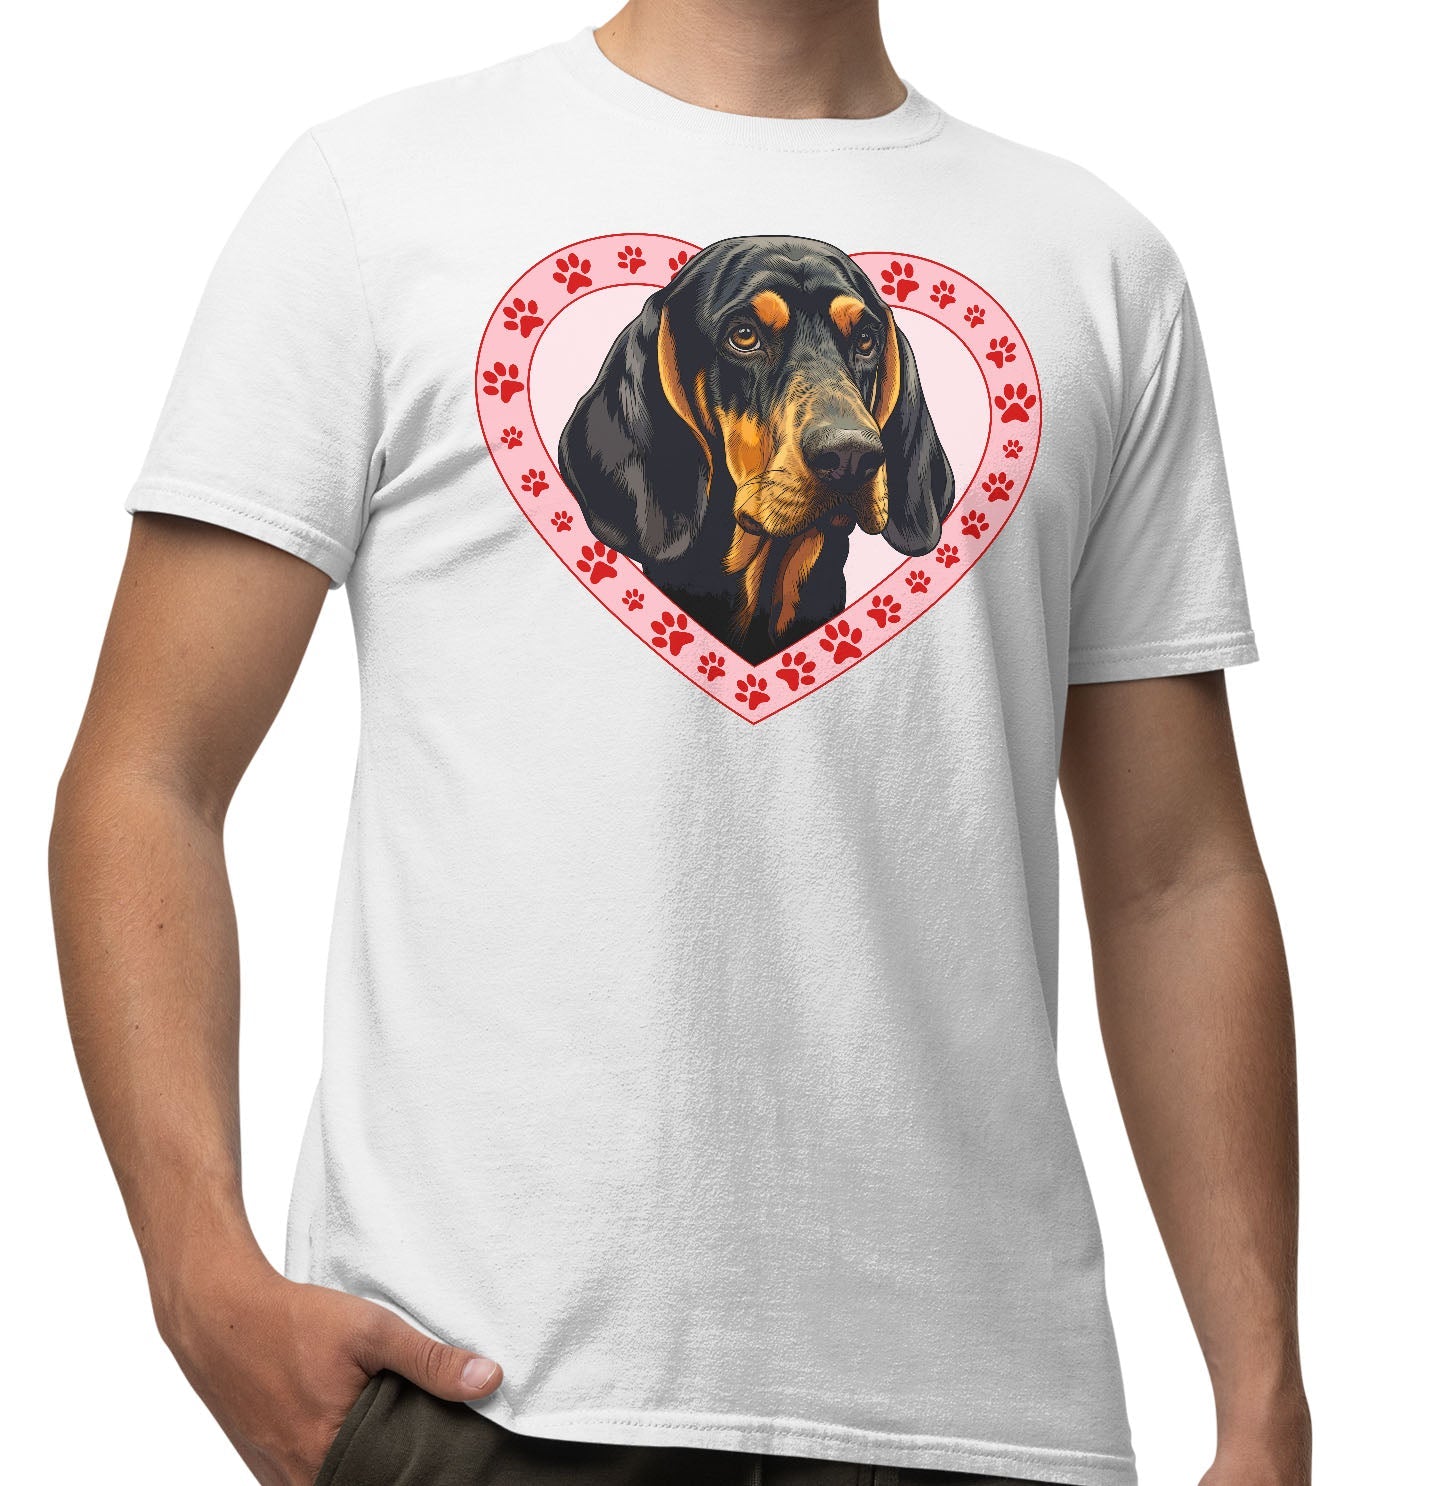 Black and Tan Coonhound Illustration In Heart - Adult Unisex T-Shirt